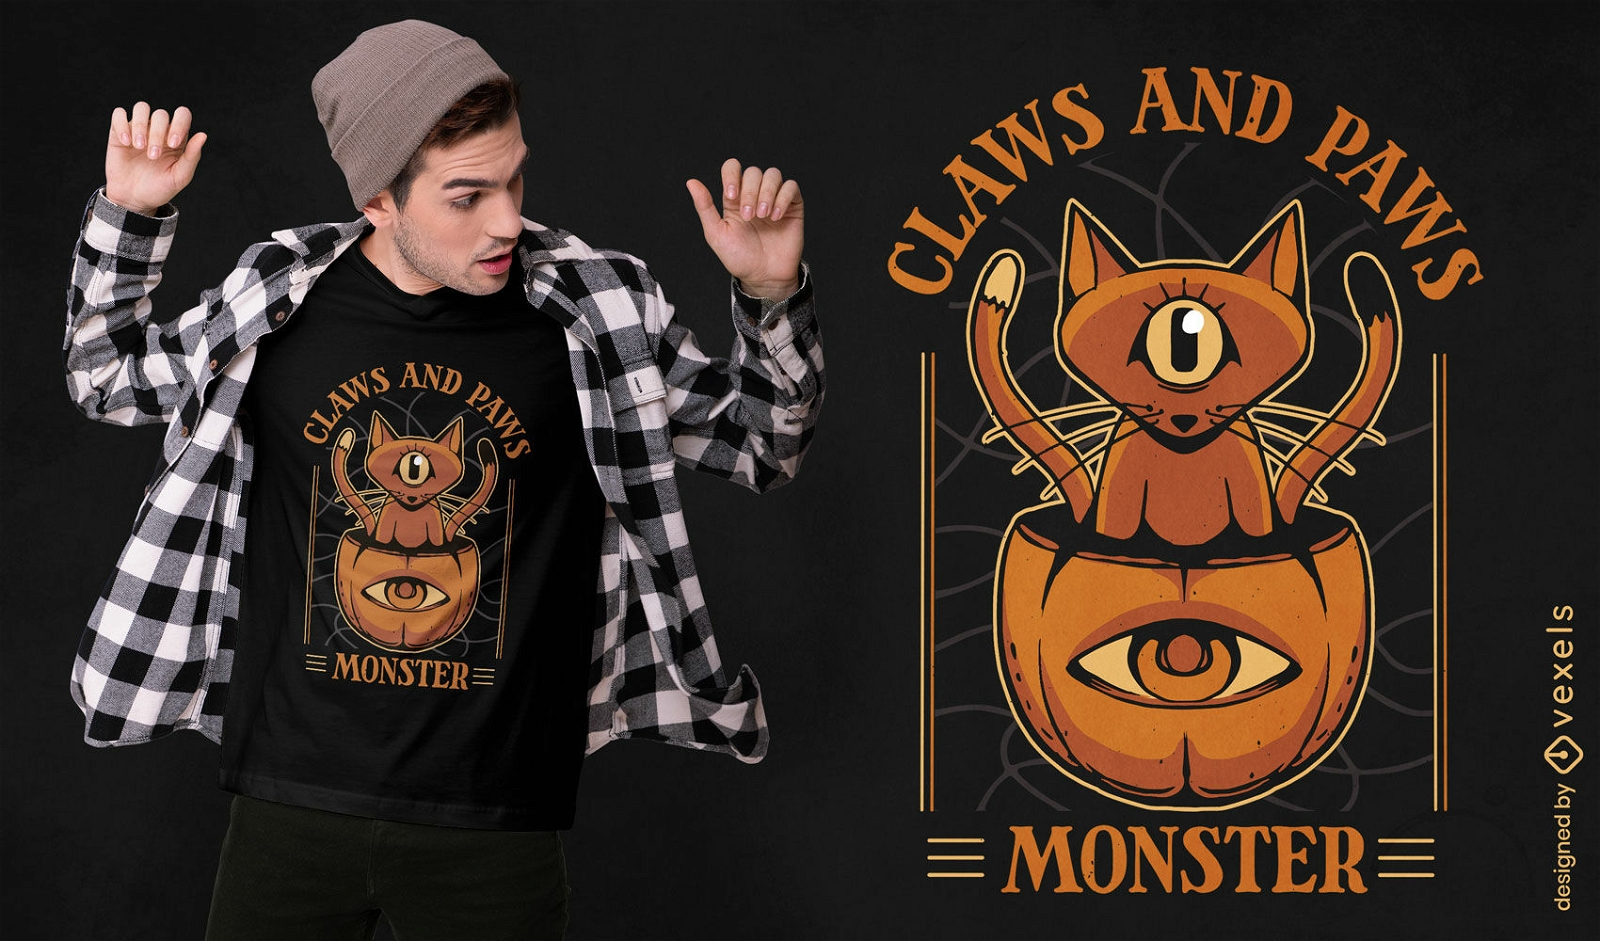 Claws and paws monster t-shirt design